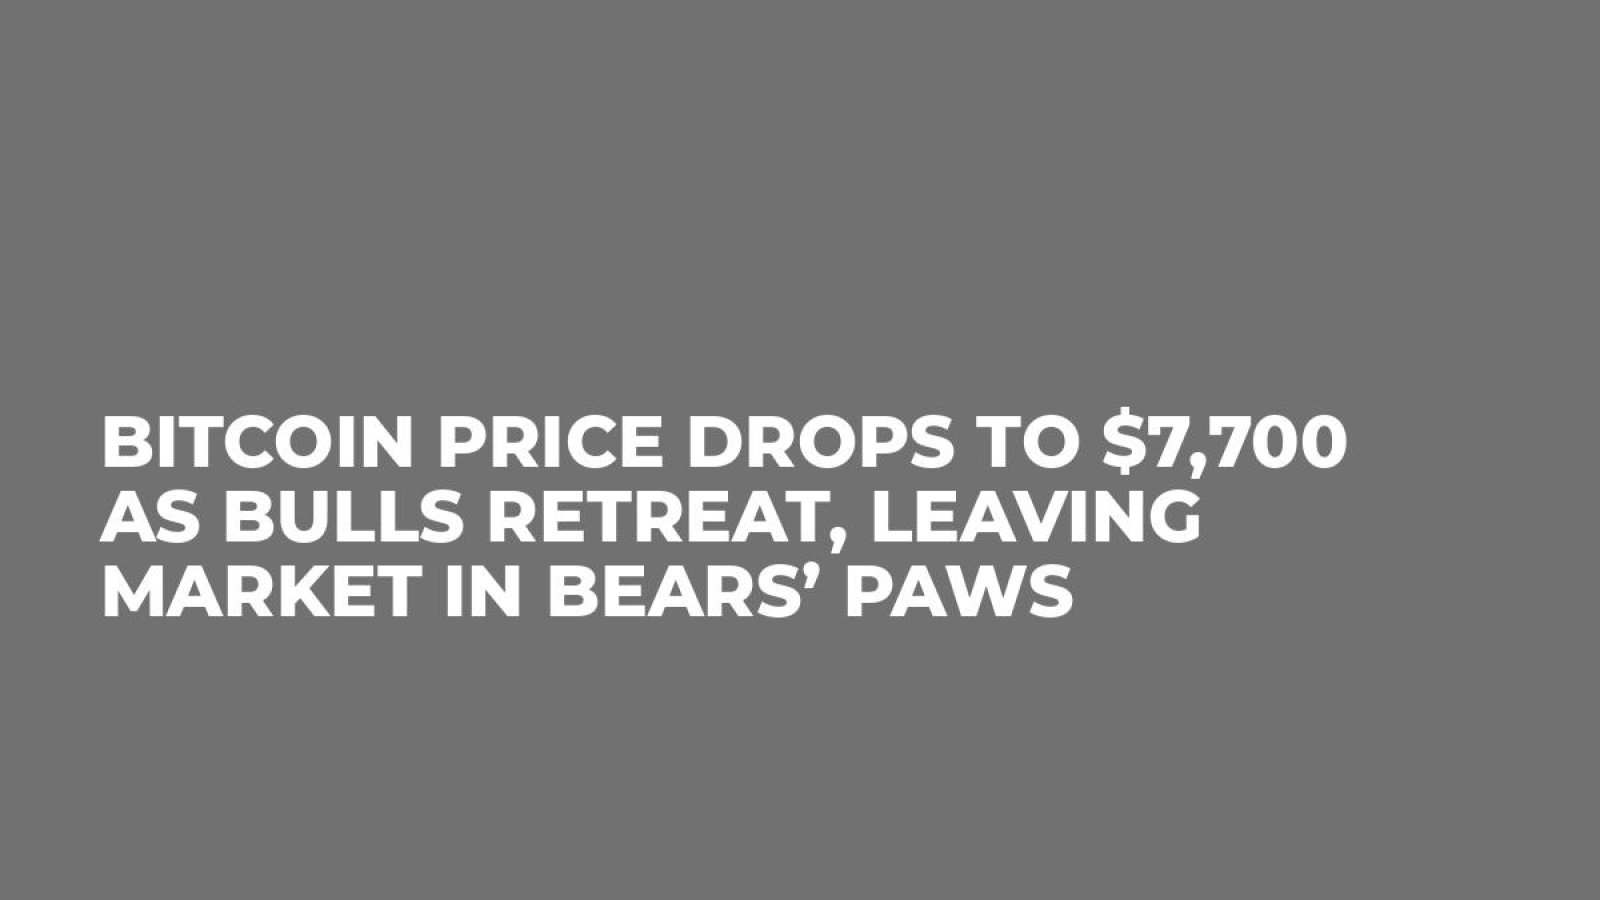 Bitcoin Price Drops to $7,700 as Bulls Retreat, Leaving Market in Bears’ Paws